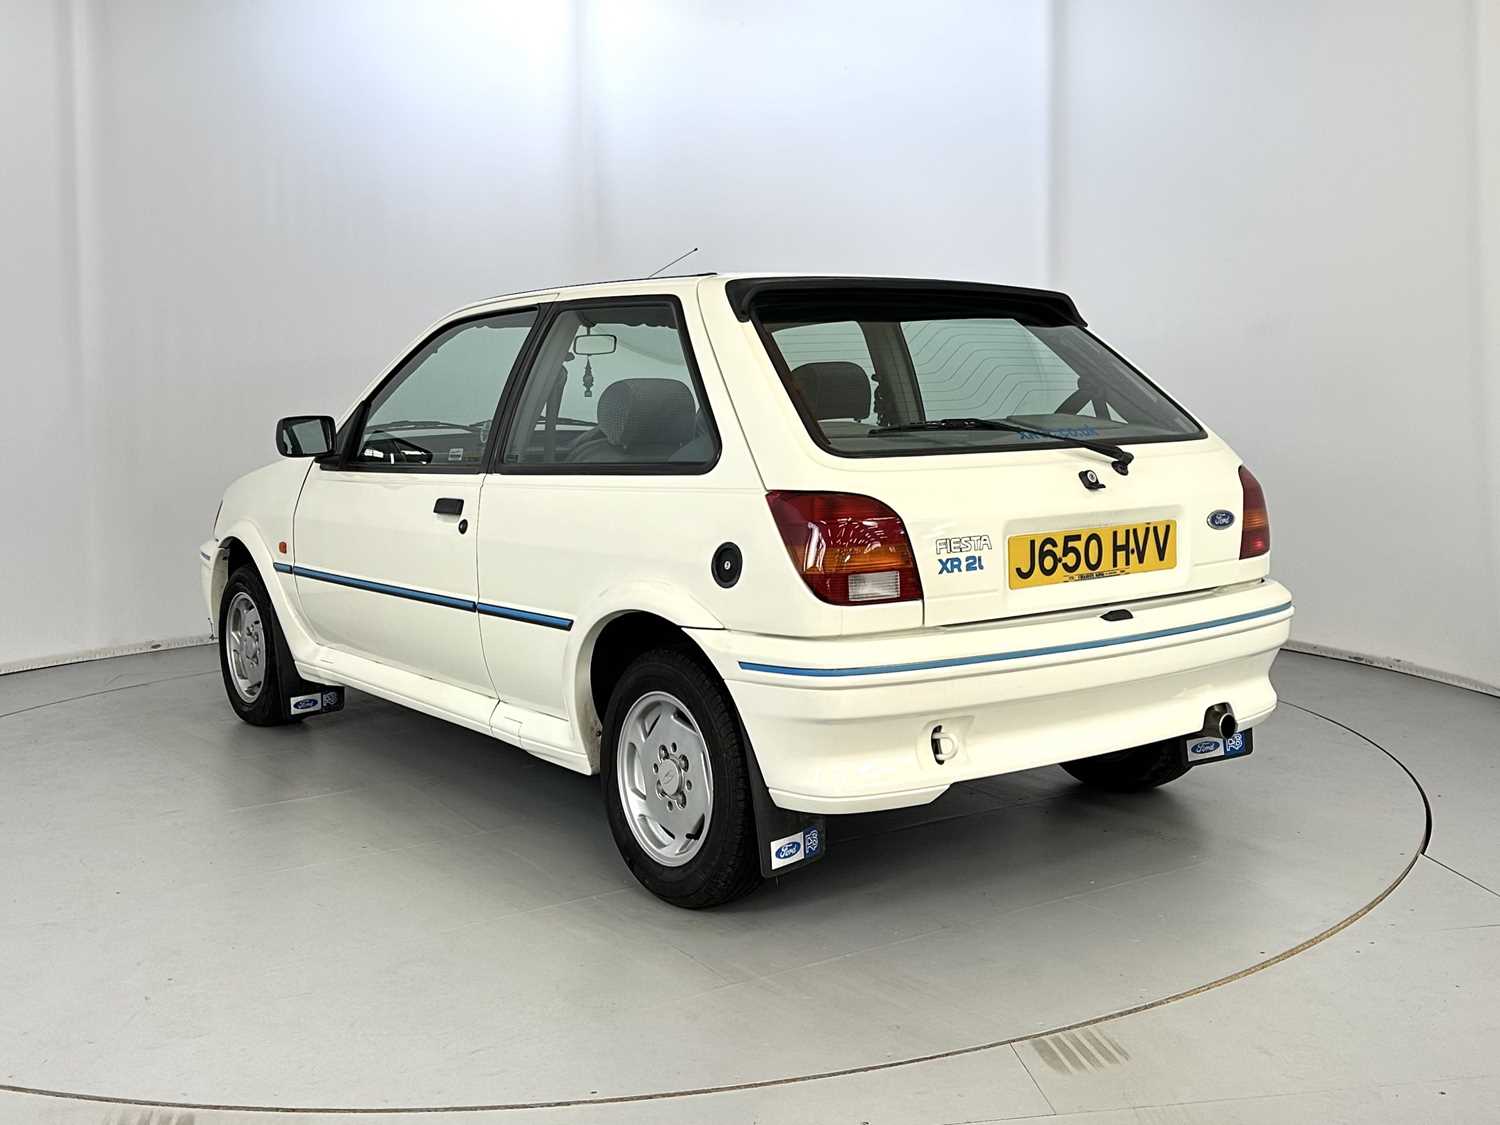 1991 Ford Fiesta XR2i - Image 7 of 30